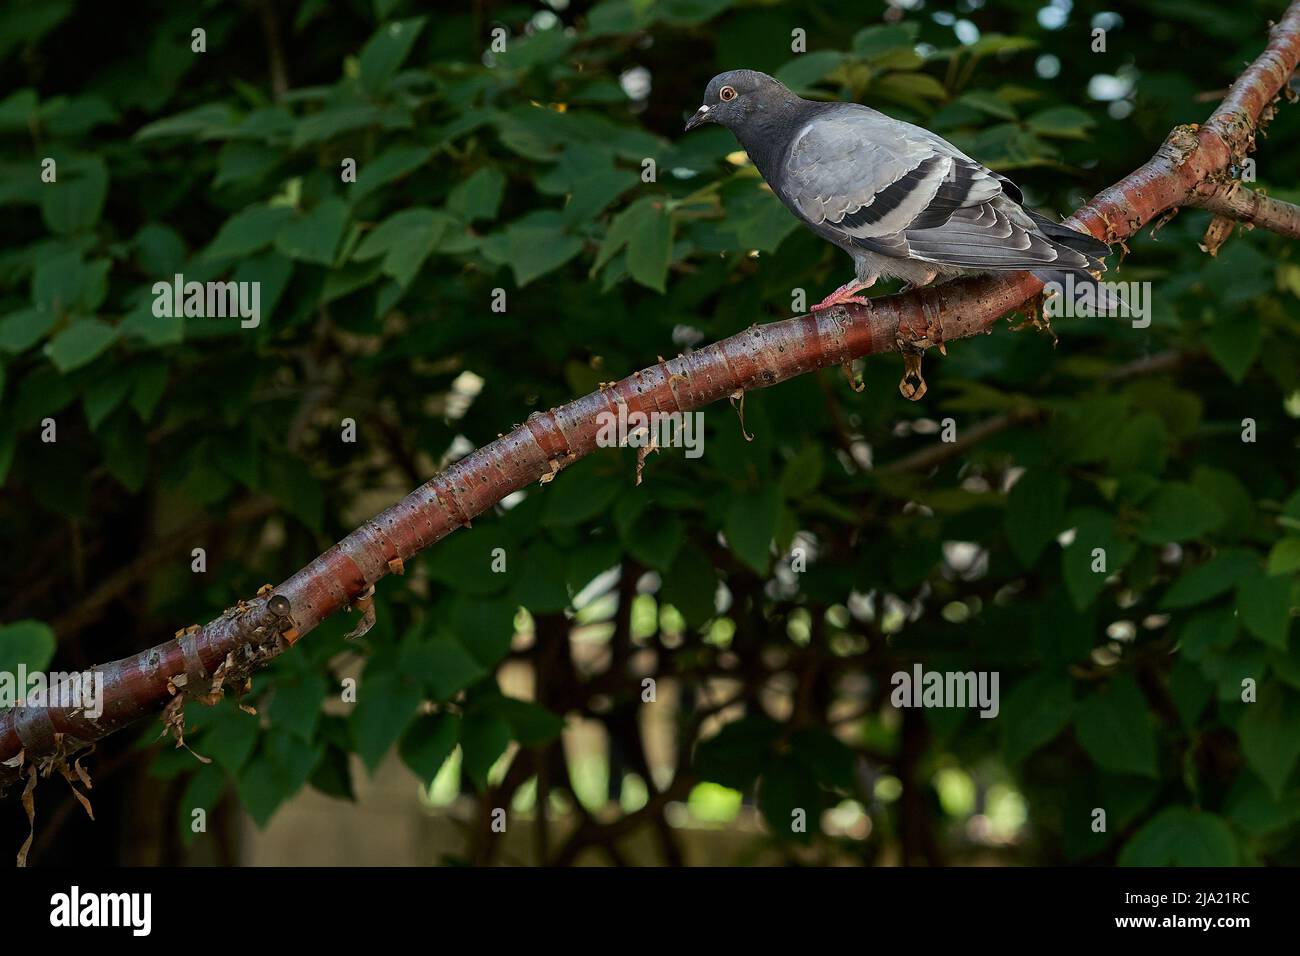 focus on pigeon on a tree limb with greenery in the background Stock Photo